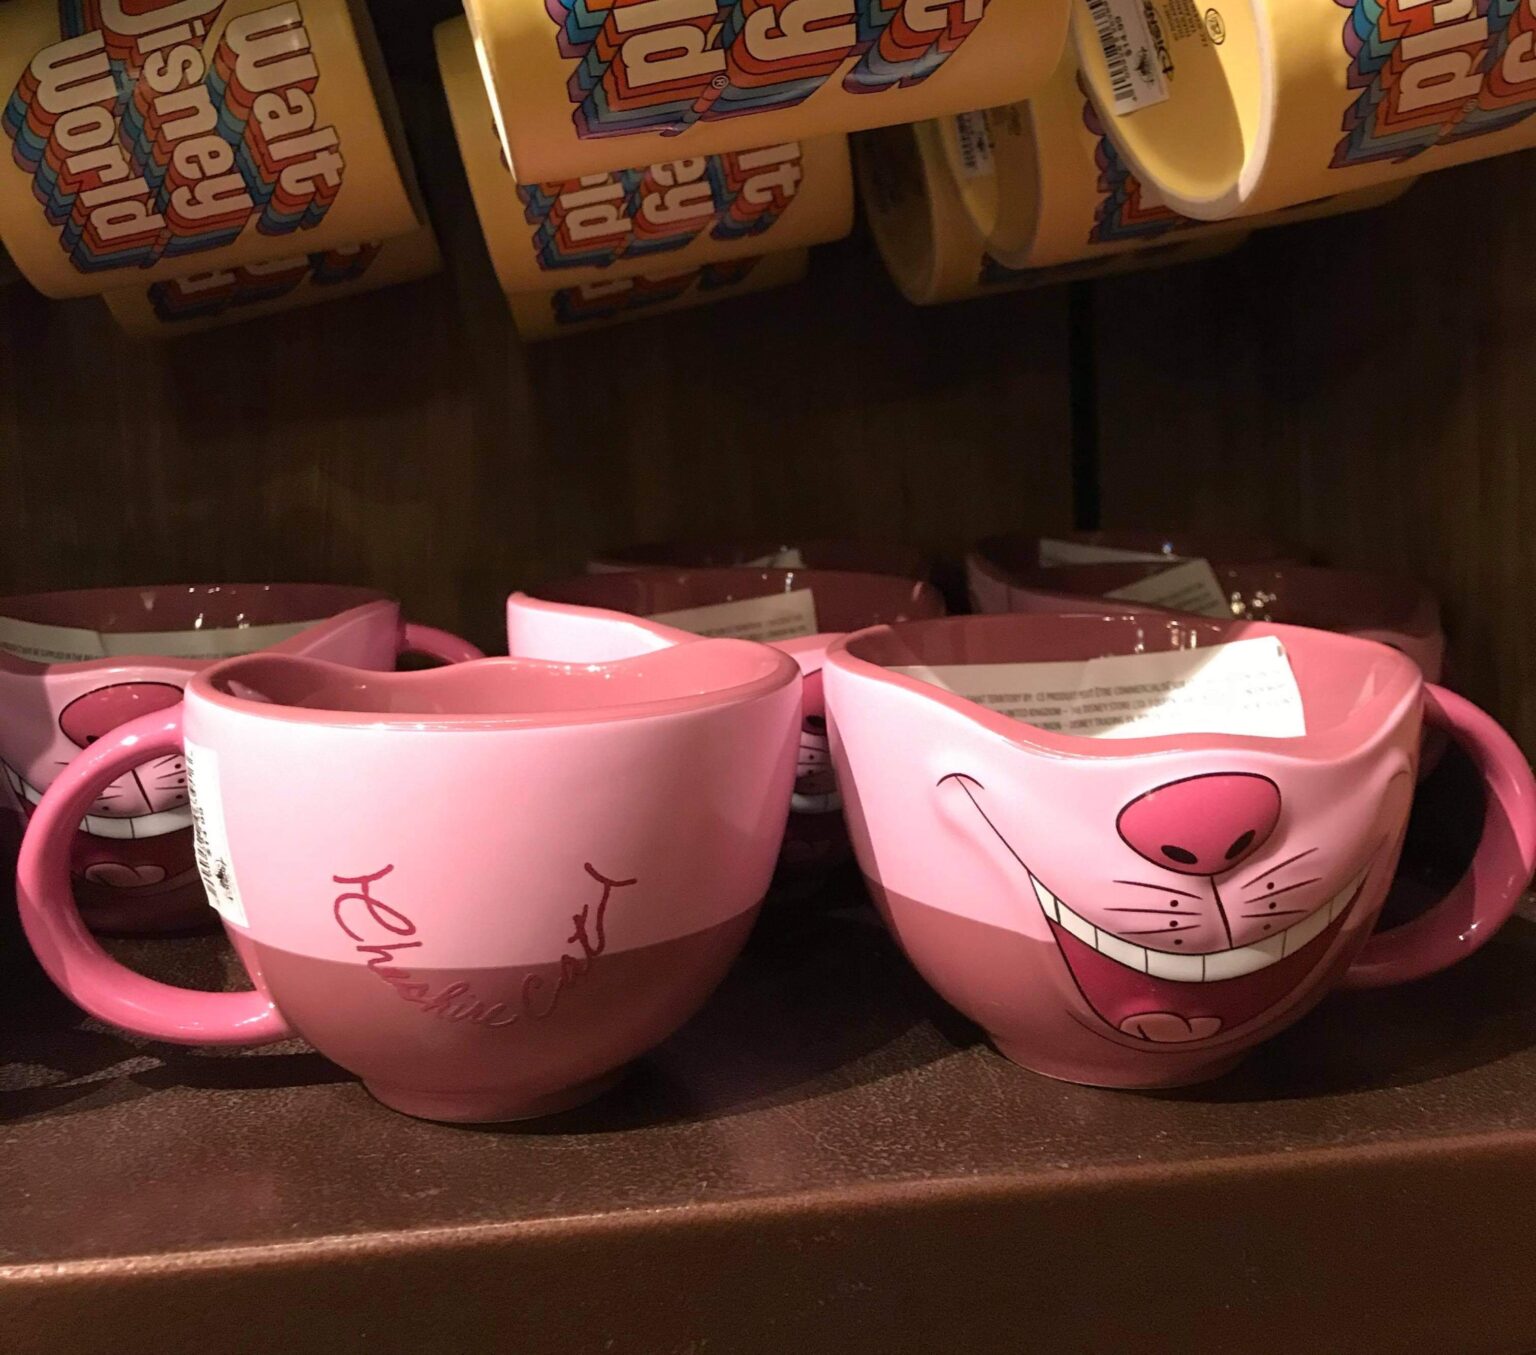 Disney Character Face Mugs Will Put a Smile on Your Face! - Decor